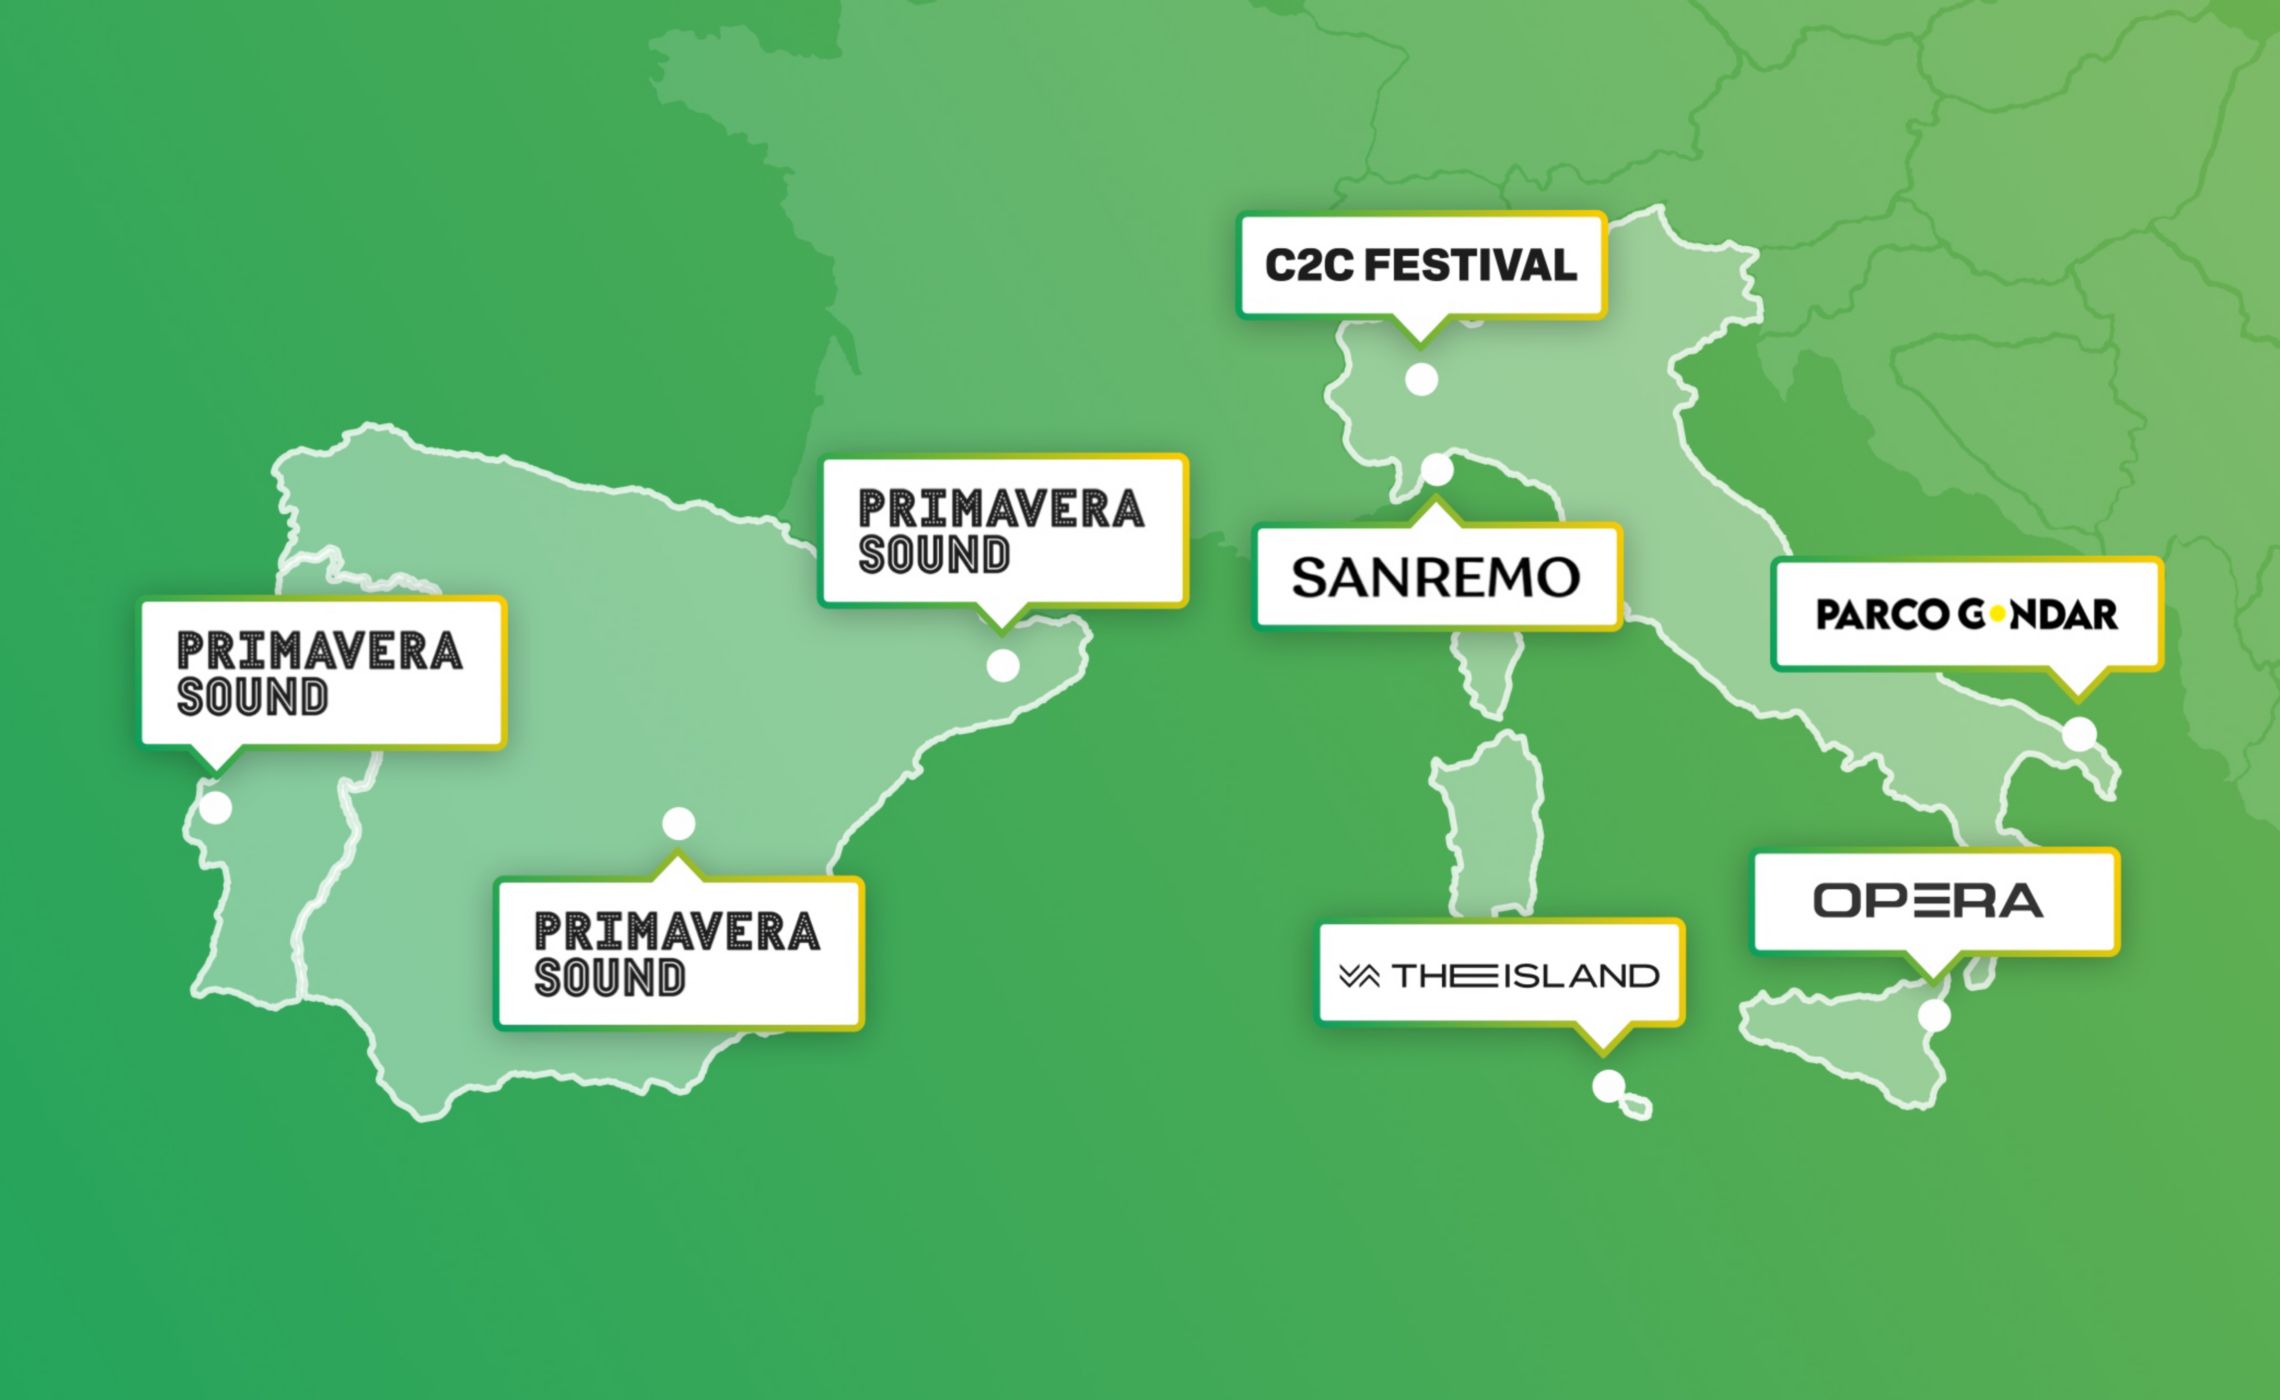 A map of the events in which Plenitude will participate as a sponsor, each venue has indicated which event it is hosting.